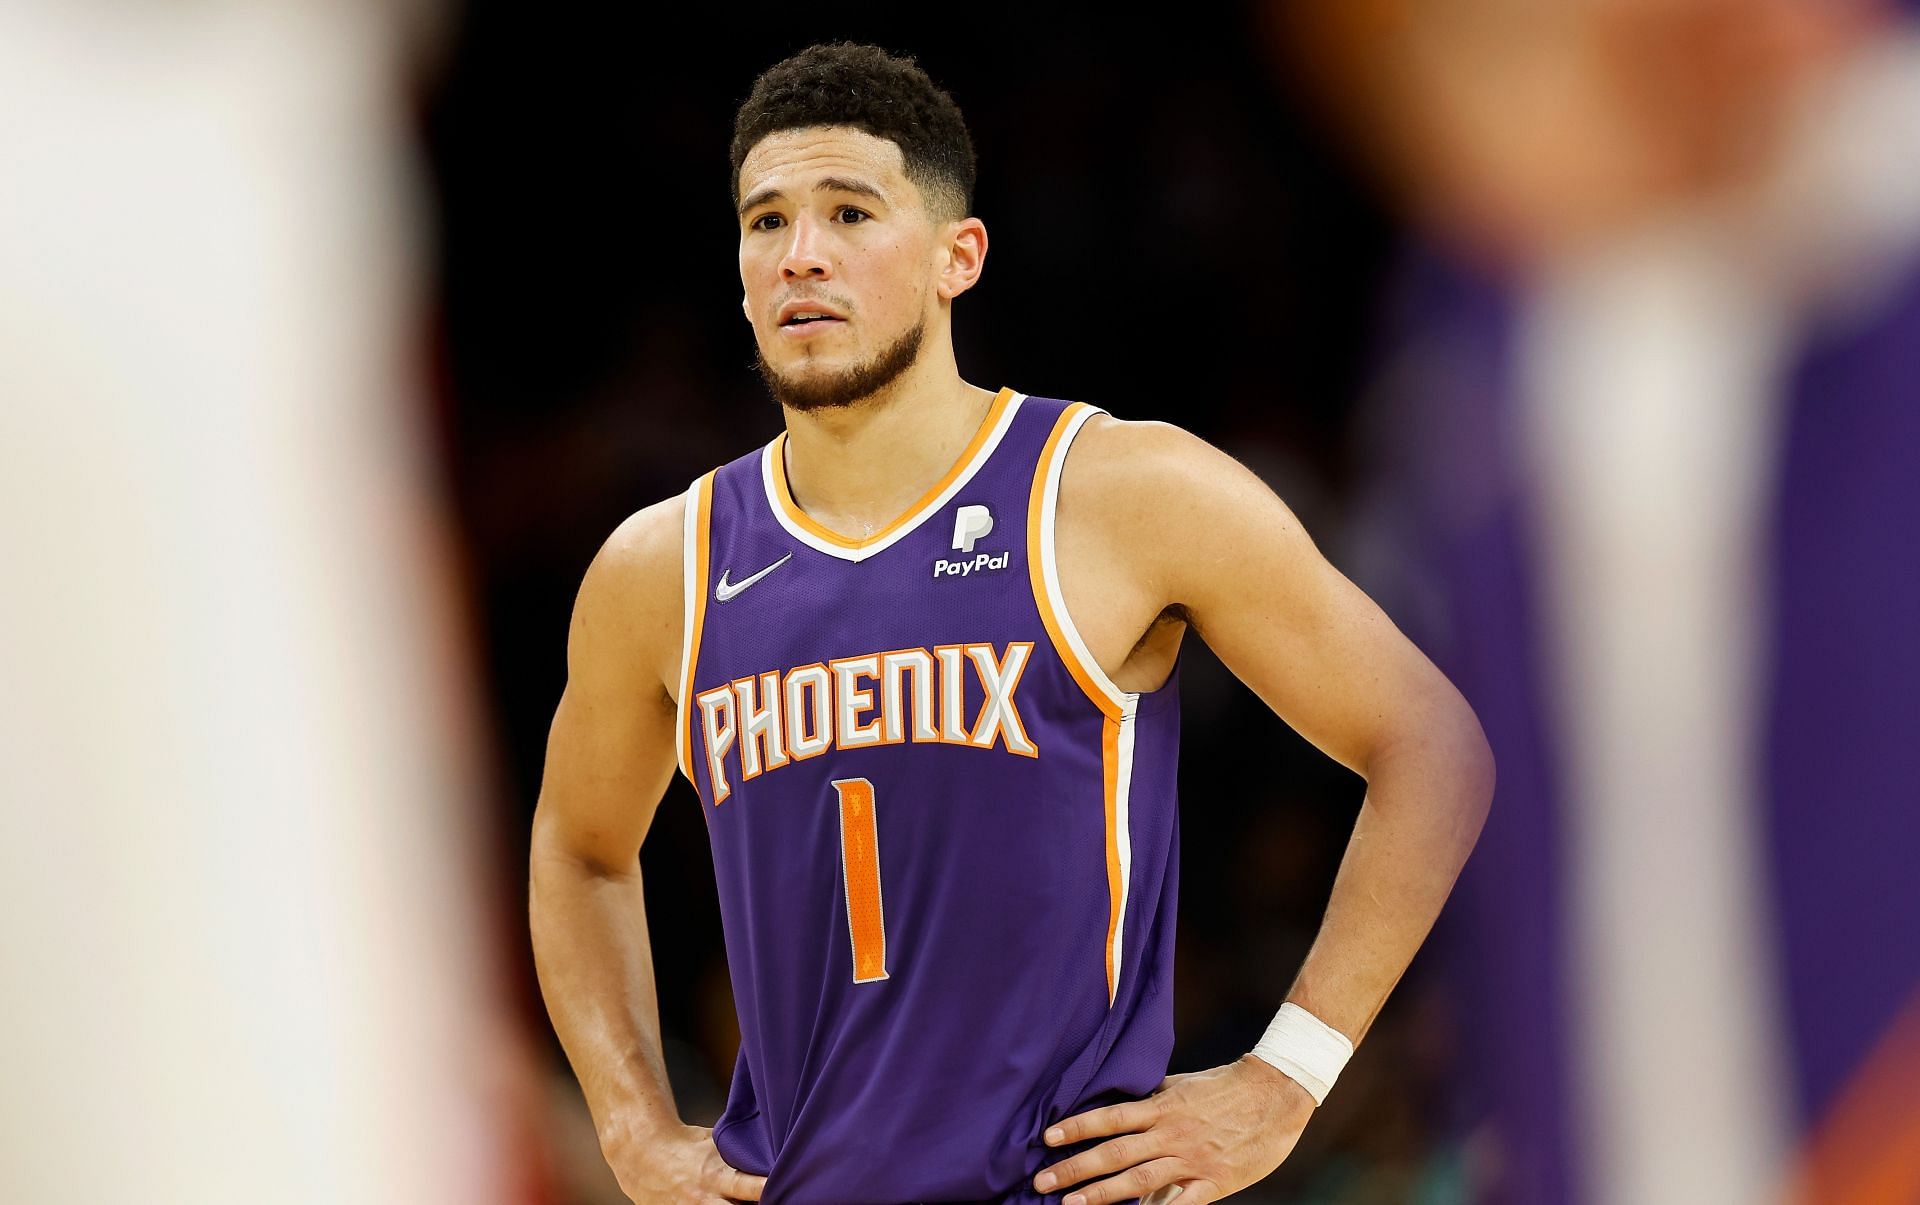 Devin Booker of the Phoenix Suns against the Houston Rockets